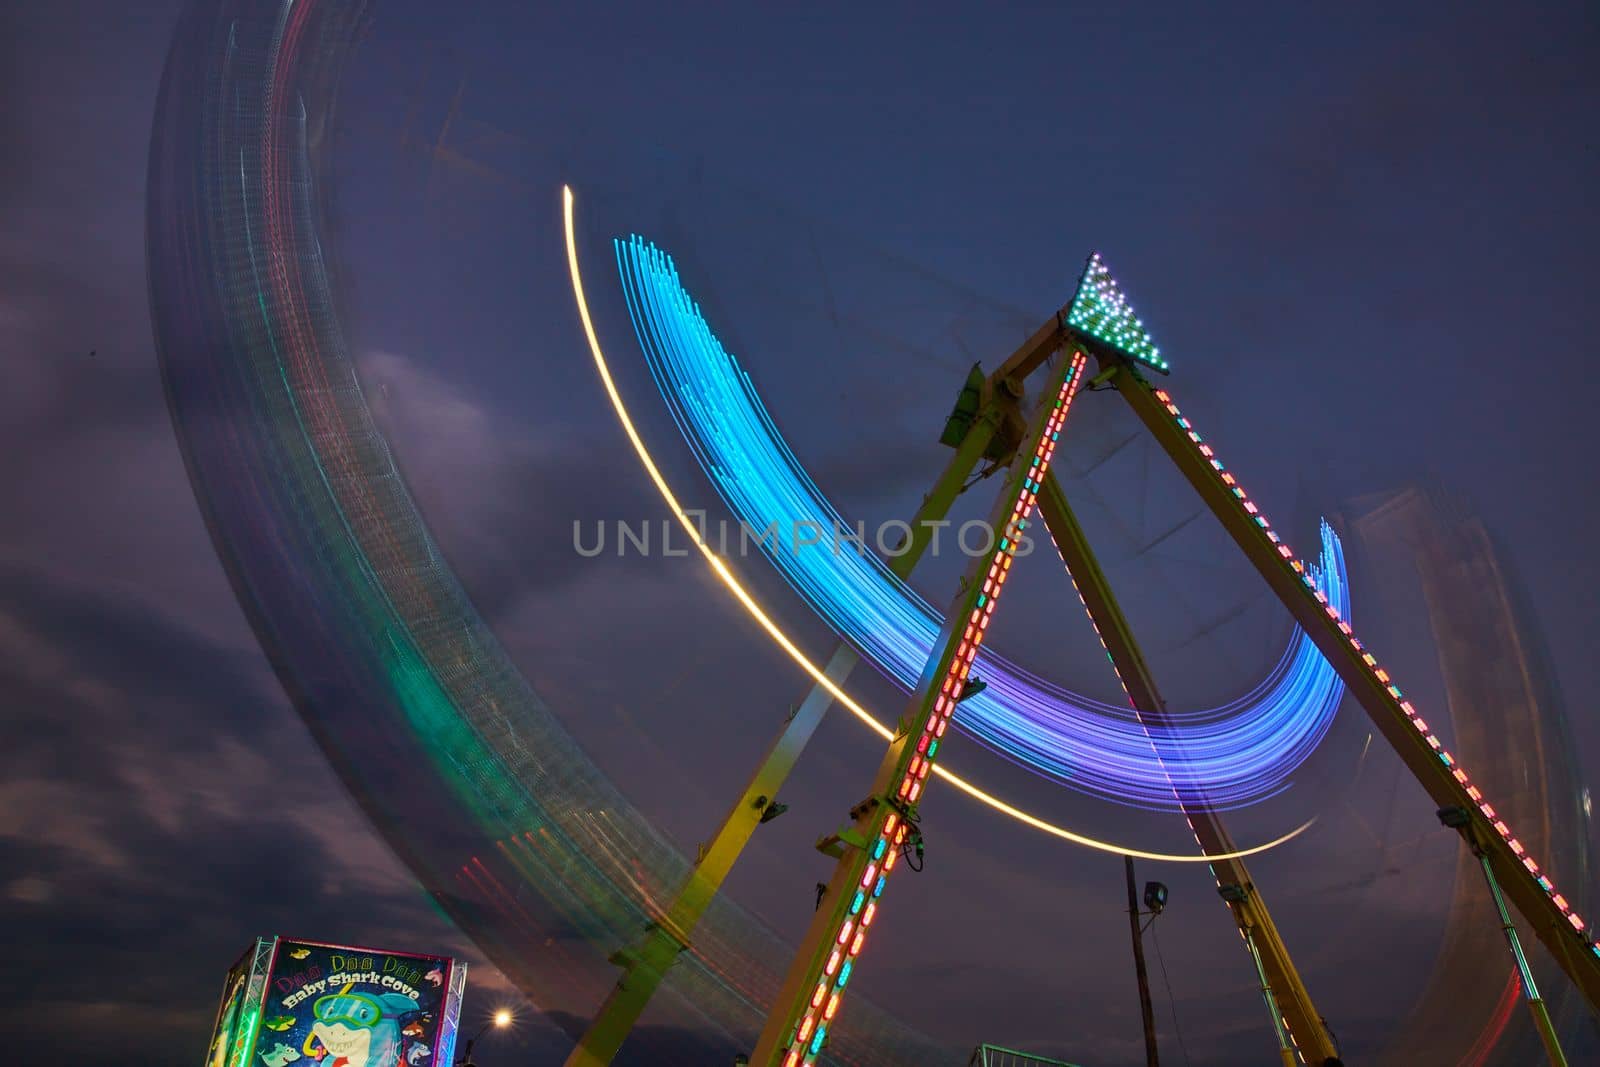 Dusk carnival ride swinging with blurred lights at county fair by njproductions